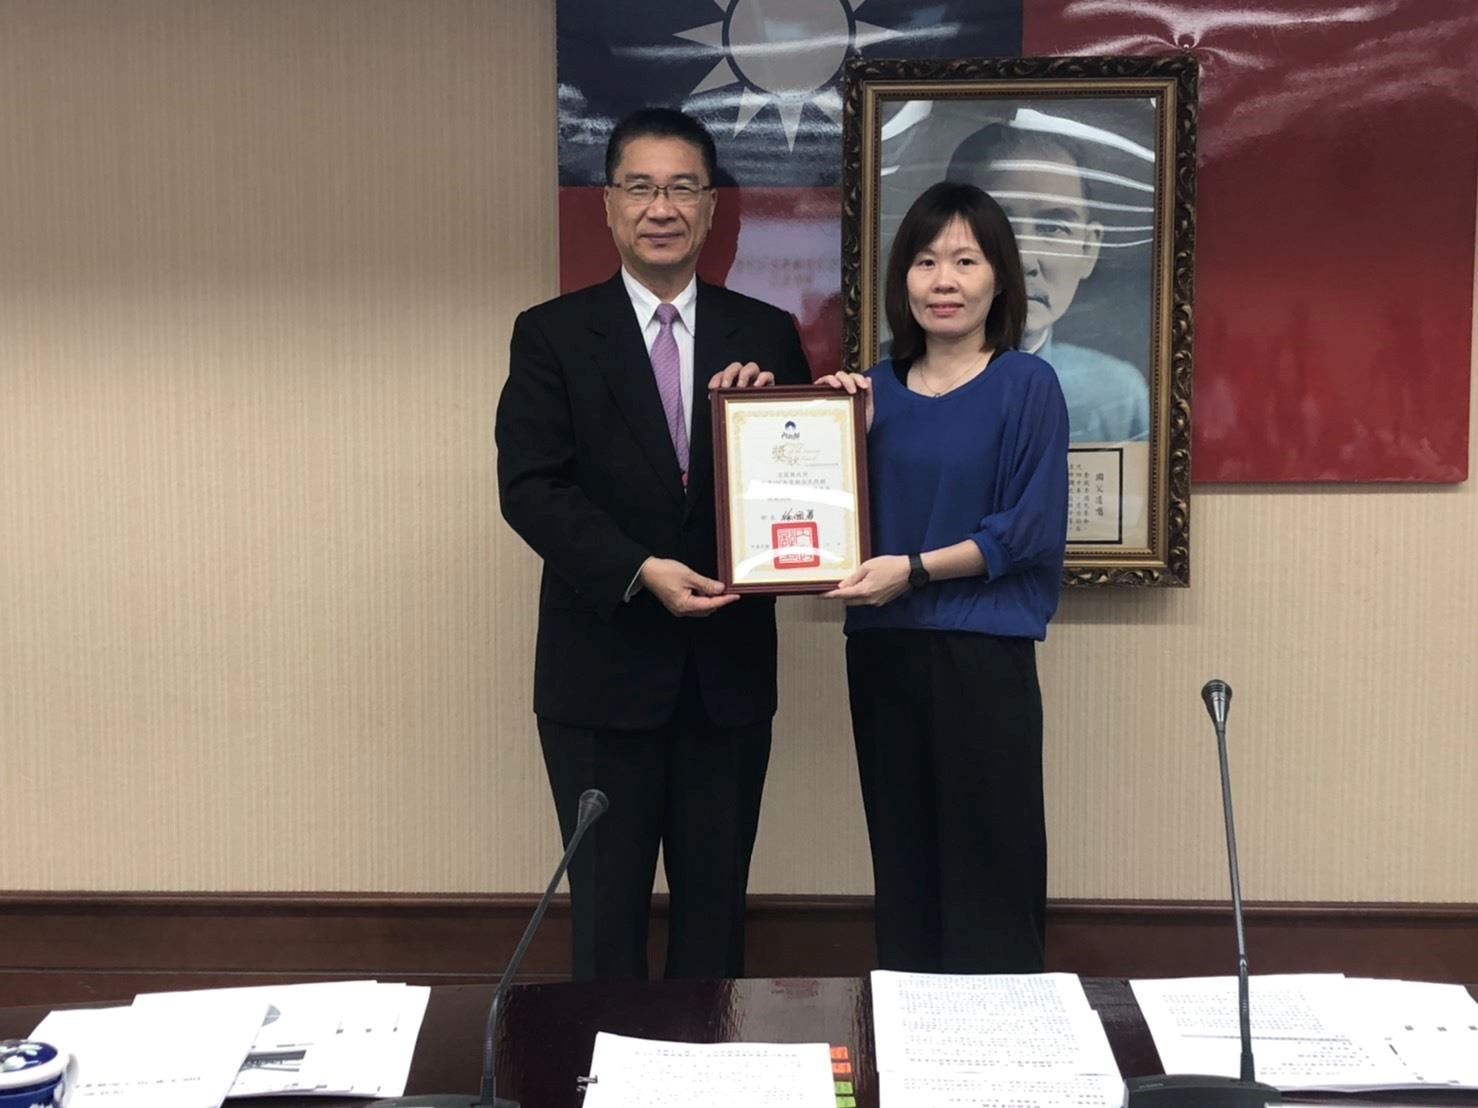 The Minister of the Interior, Hsu Kuo Yung, awarding Yilan County Government the excellent prize for new residents’ care services in the evaluation of performance on the Board of Ministry of the Interior in 2018)